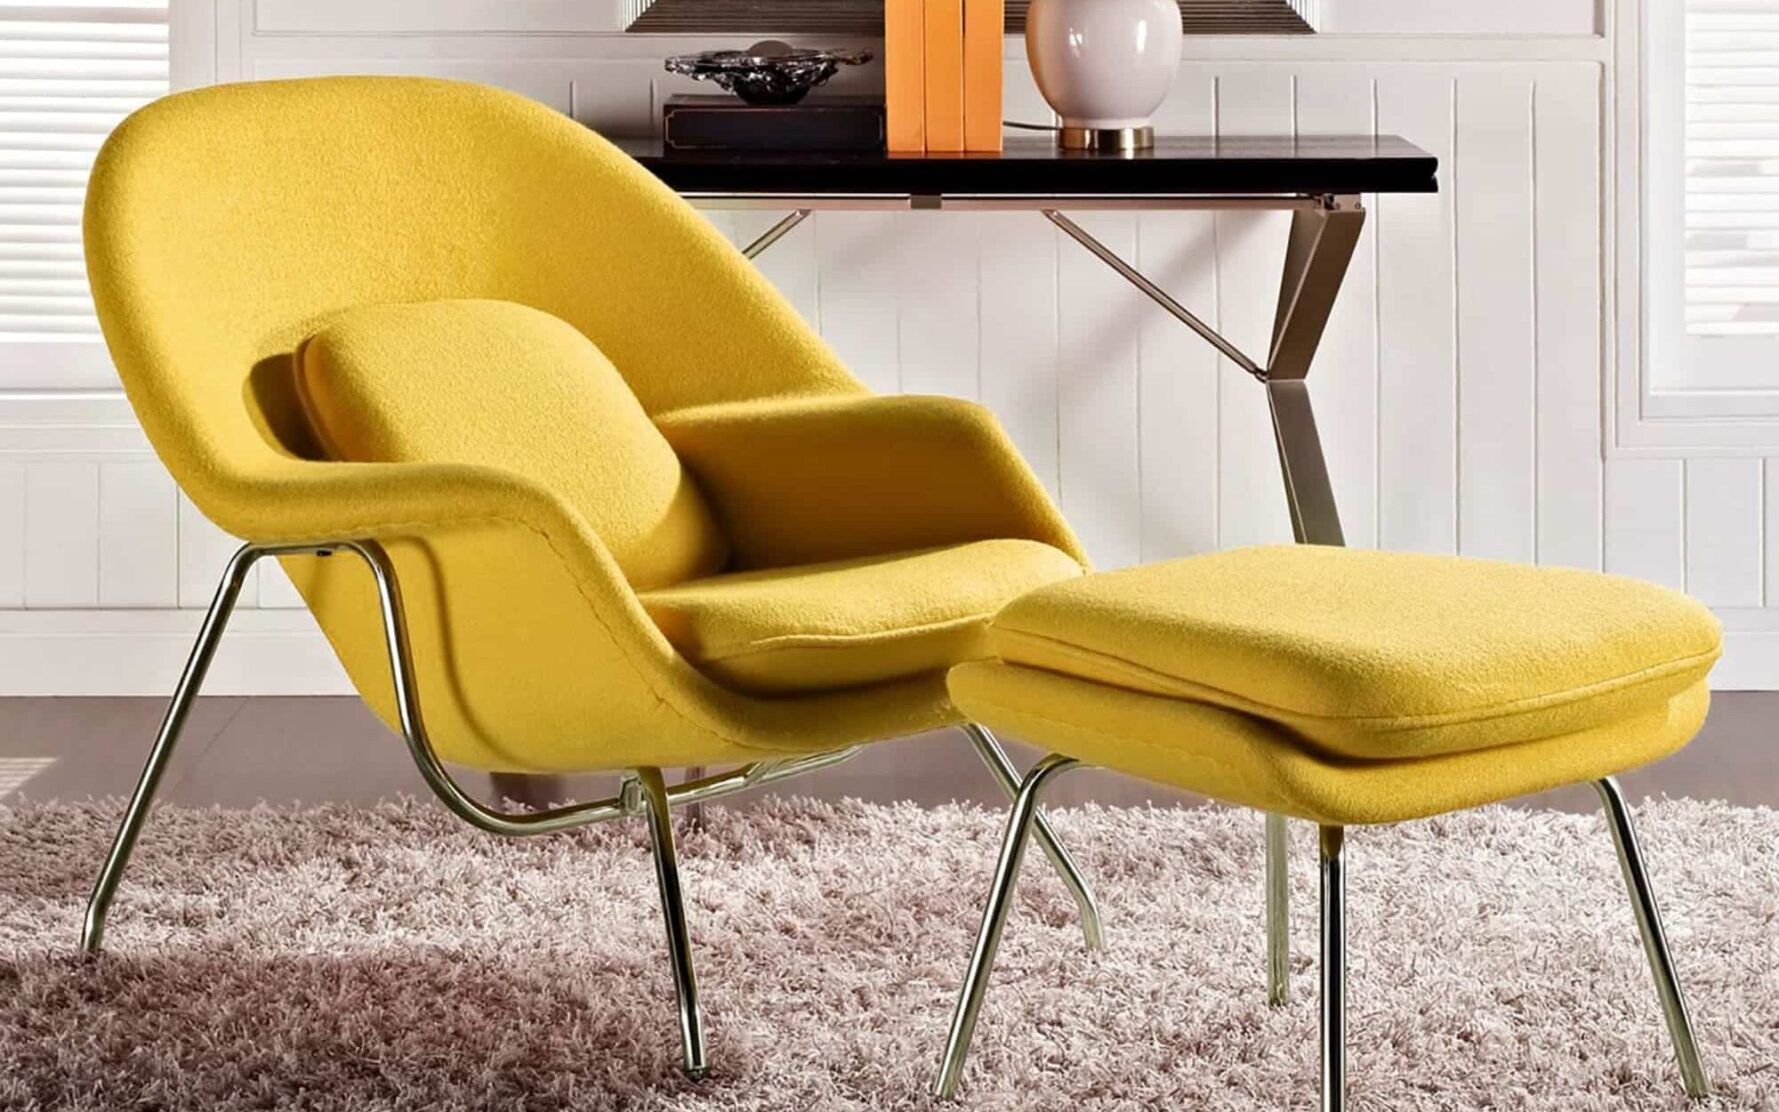 How to Find an Affordable Eames Chair Replica